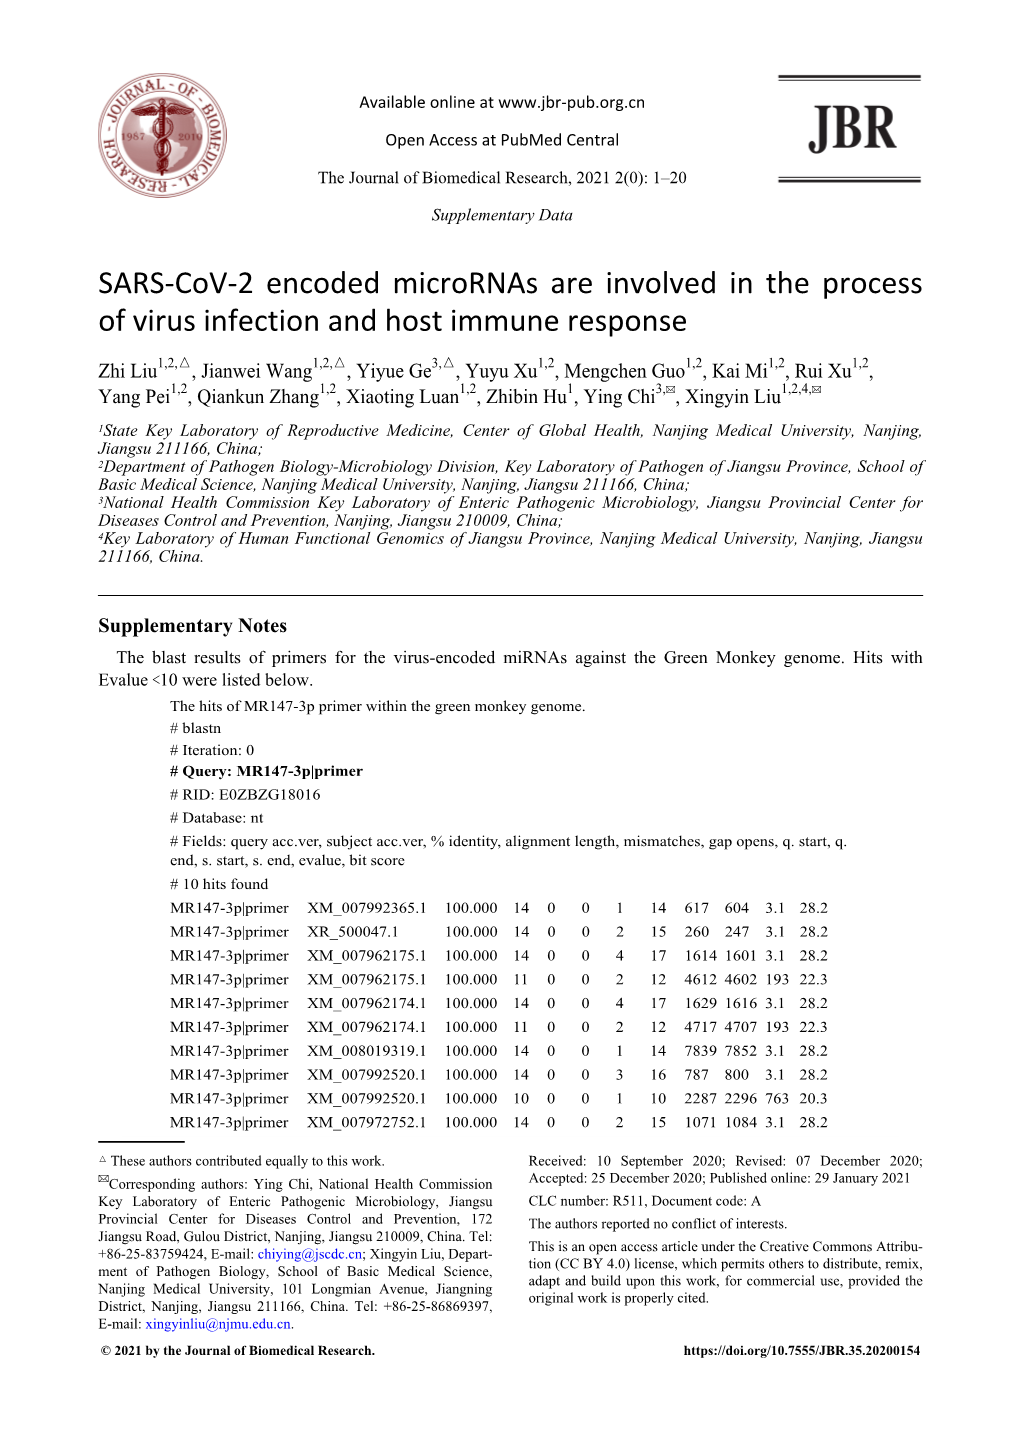 SARS-Cov-2 Encoded Micrornas Are Involved in the Process of Virus Infection and Host Immune Response